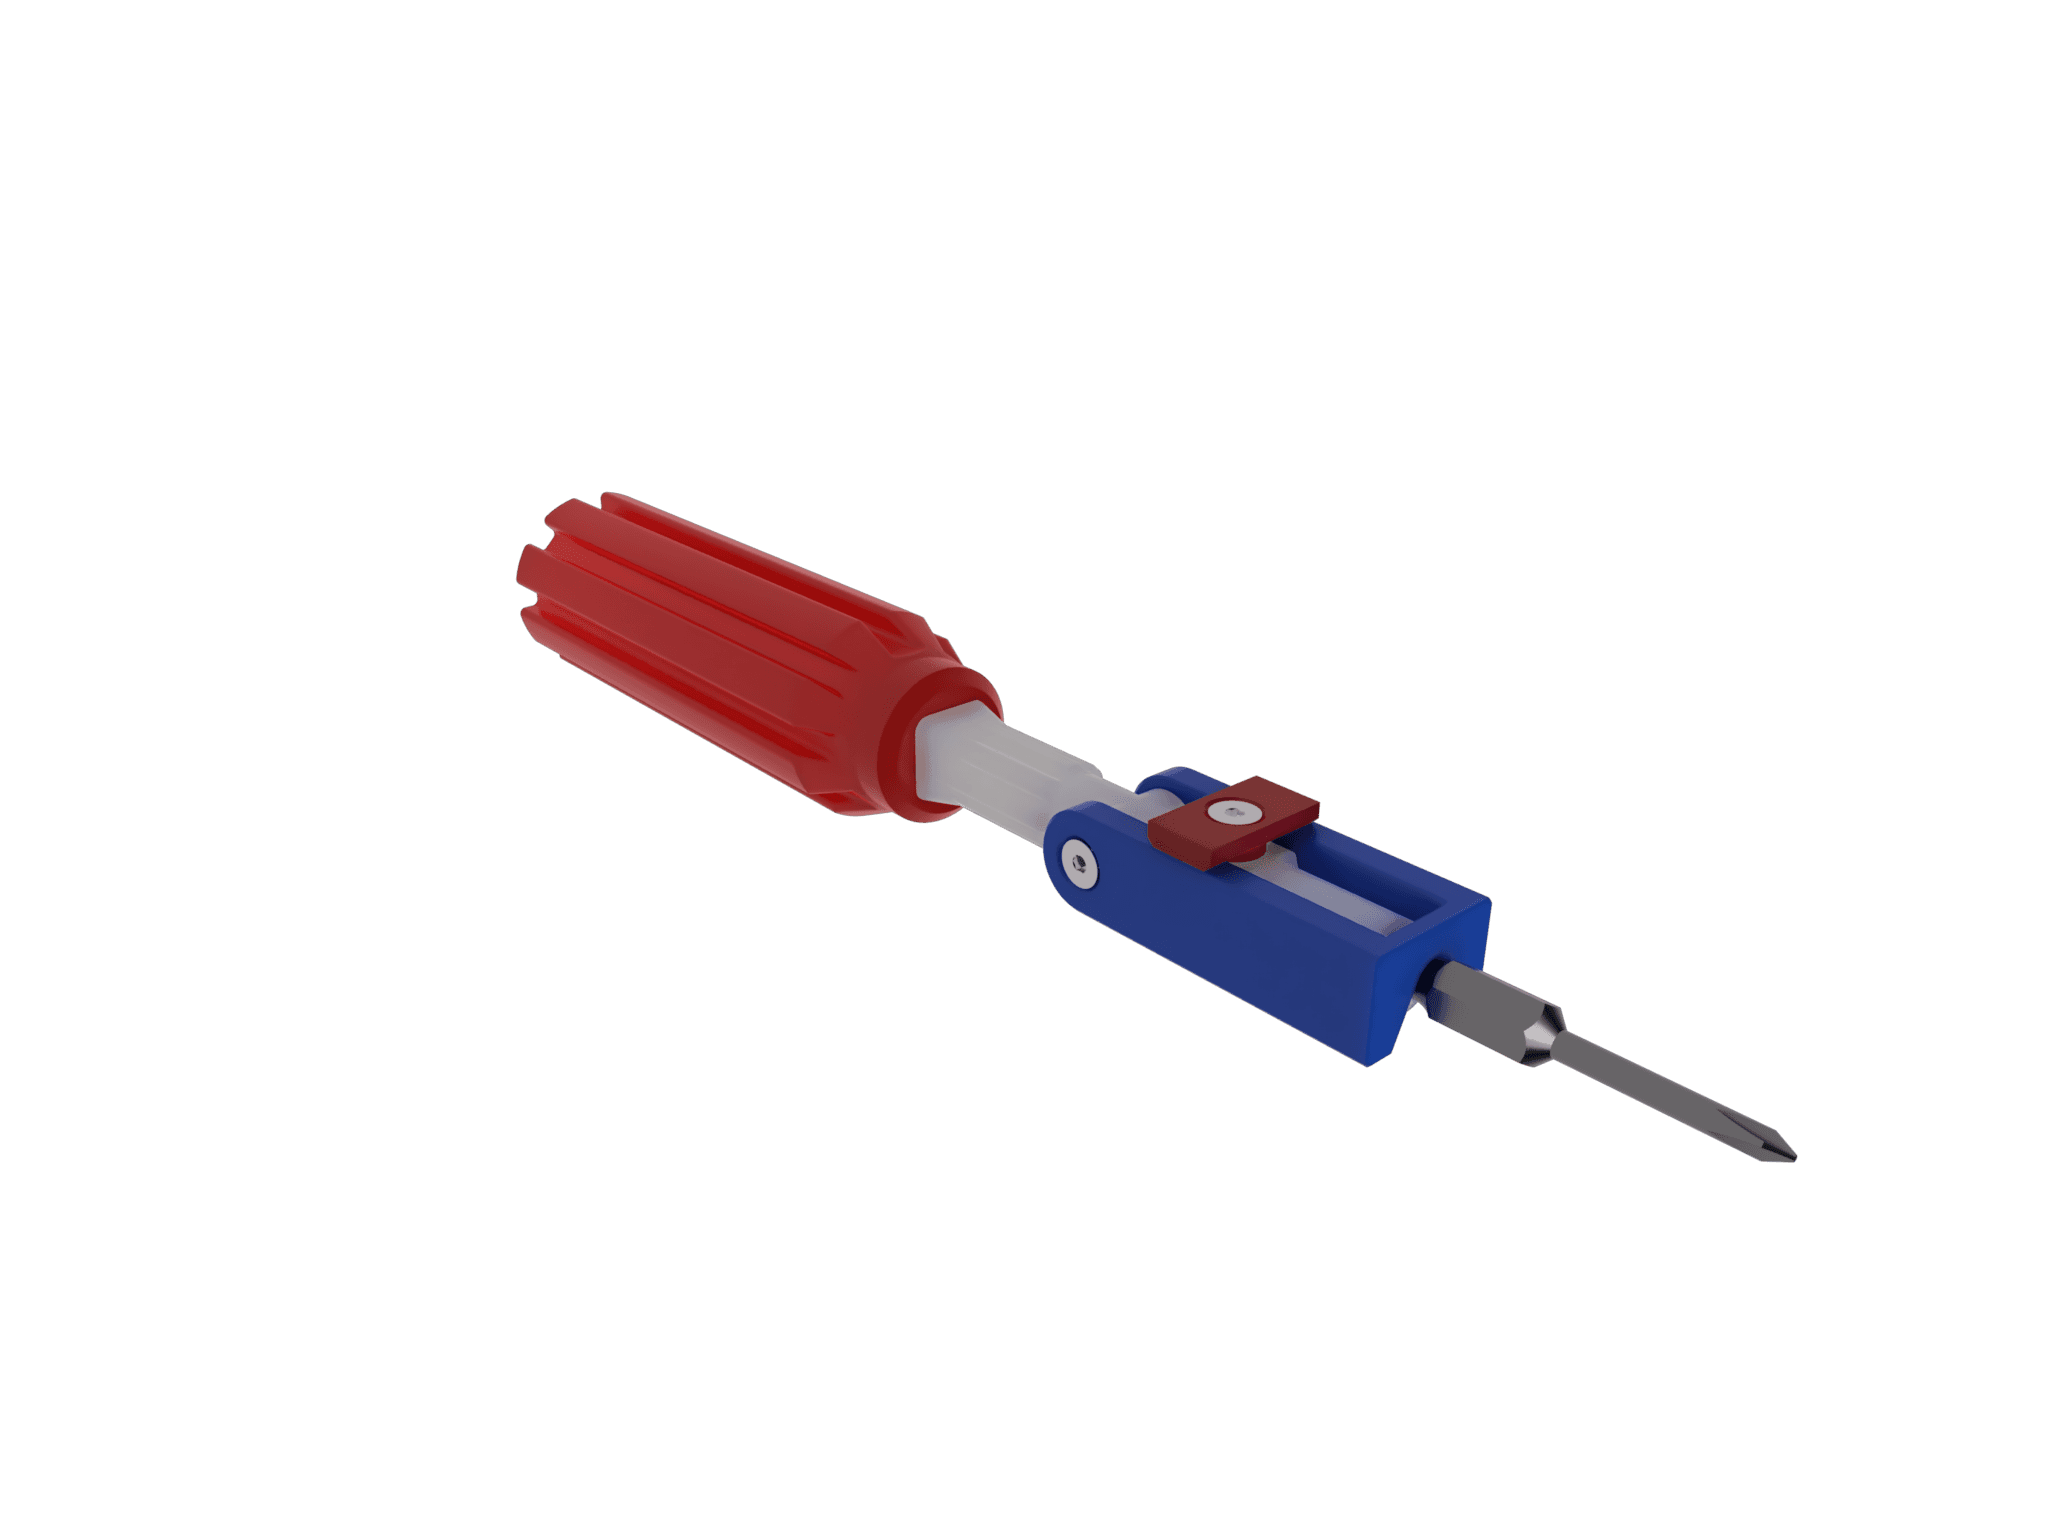 3D Printed Screwdriver (no magnets required!) 3d model